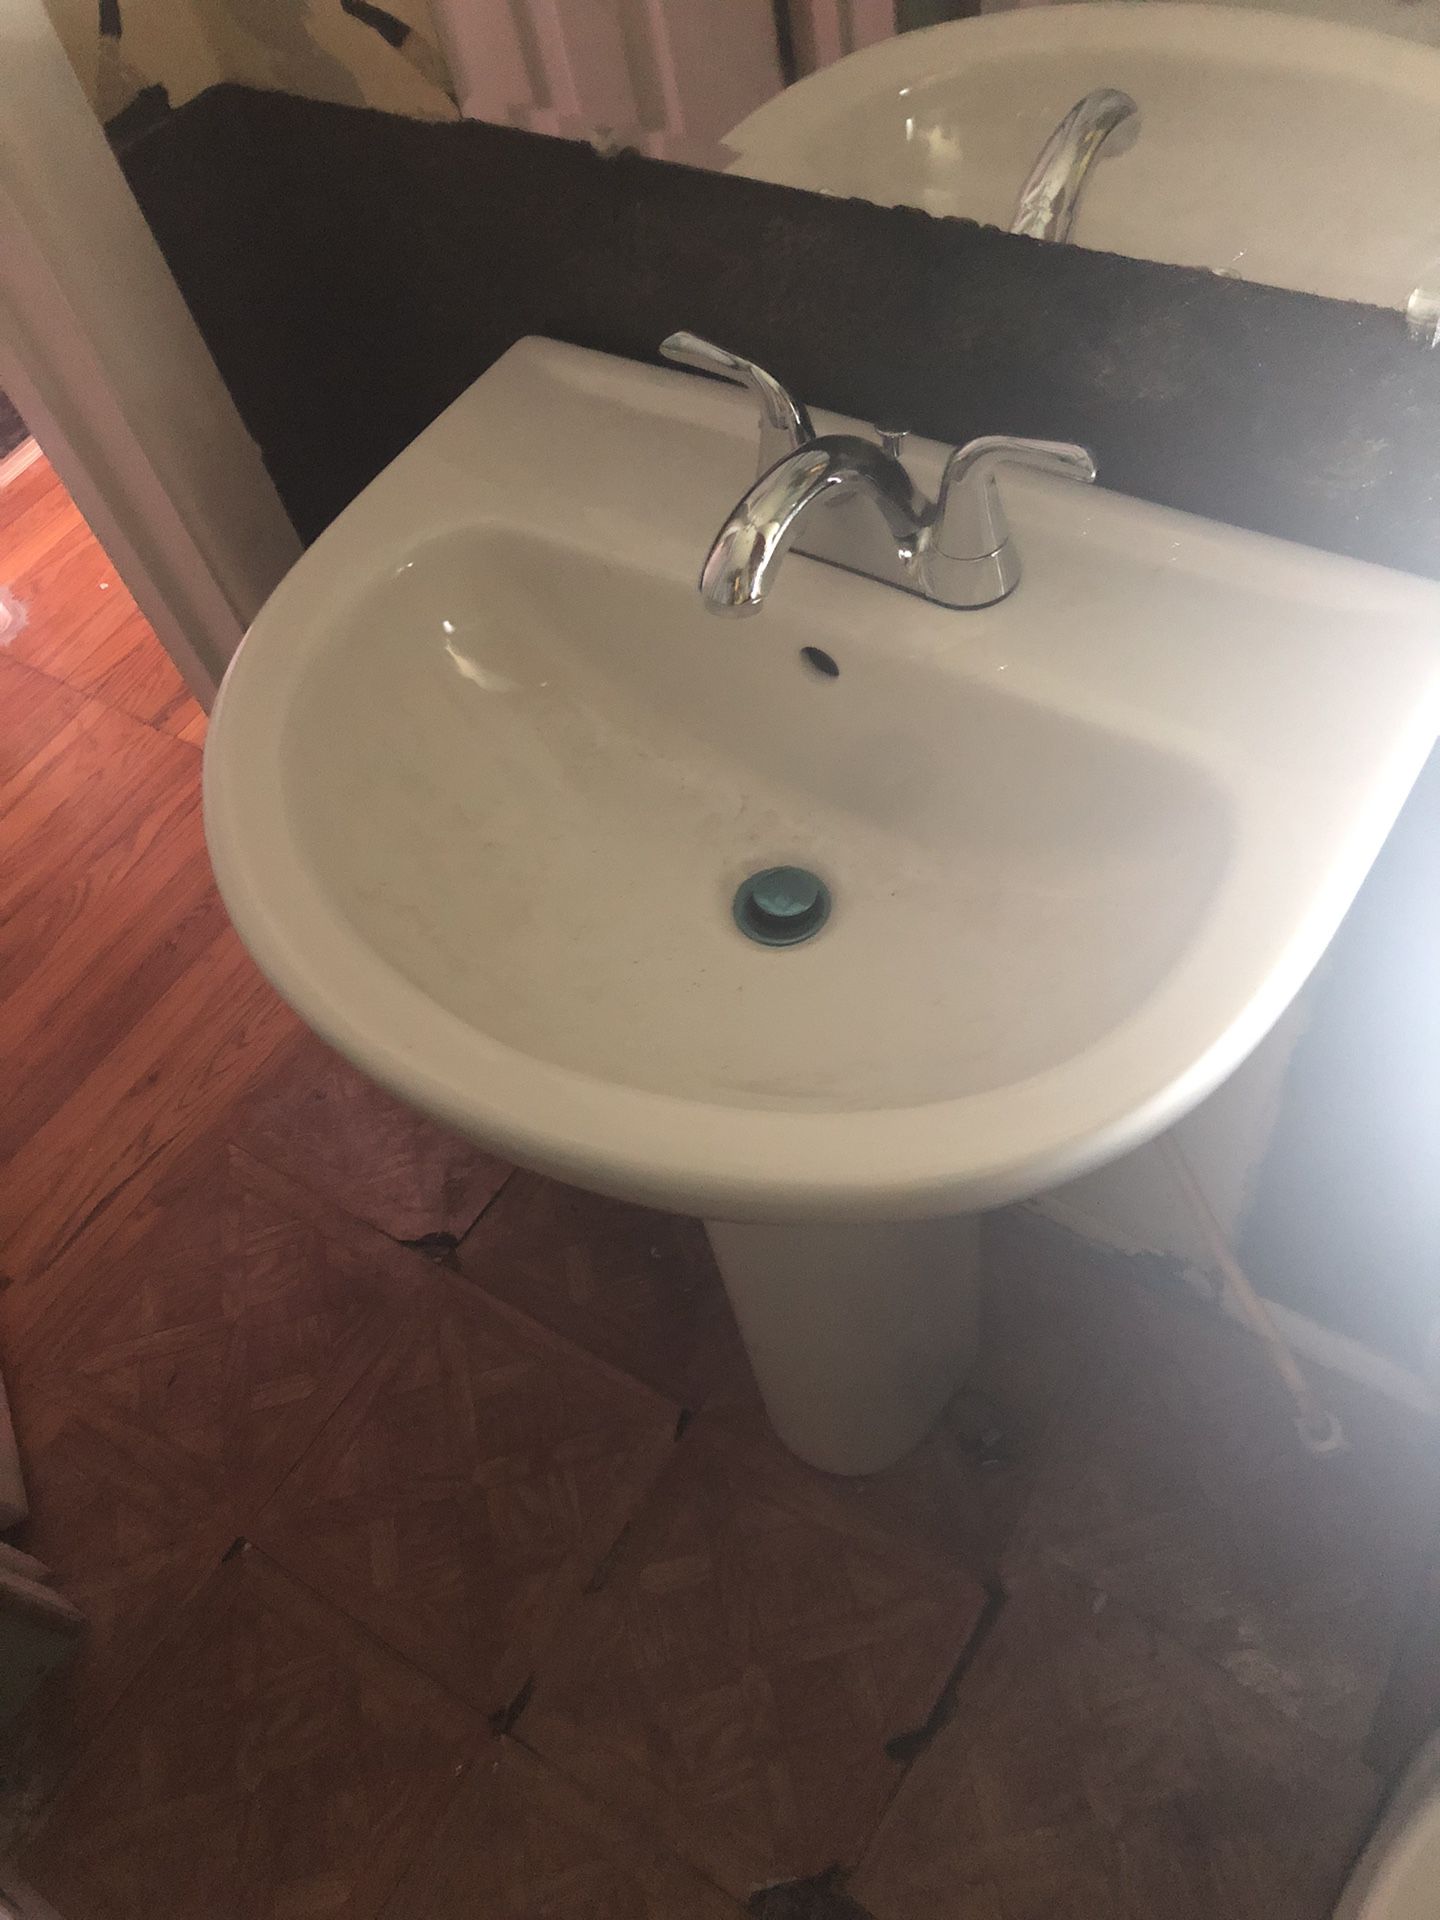 Brand new sink just put together to show you